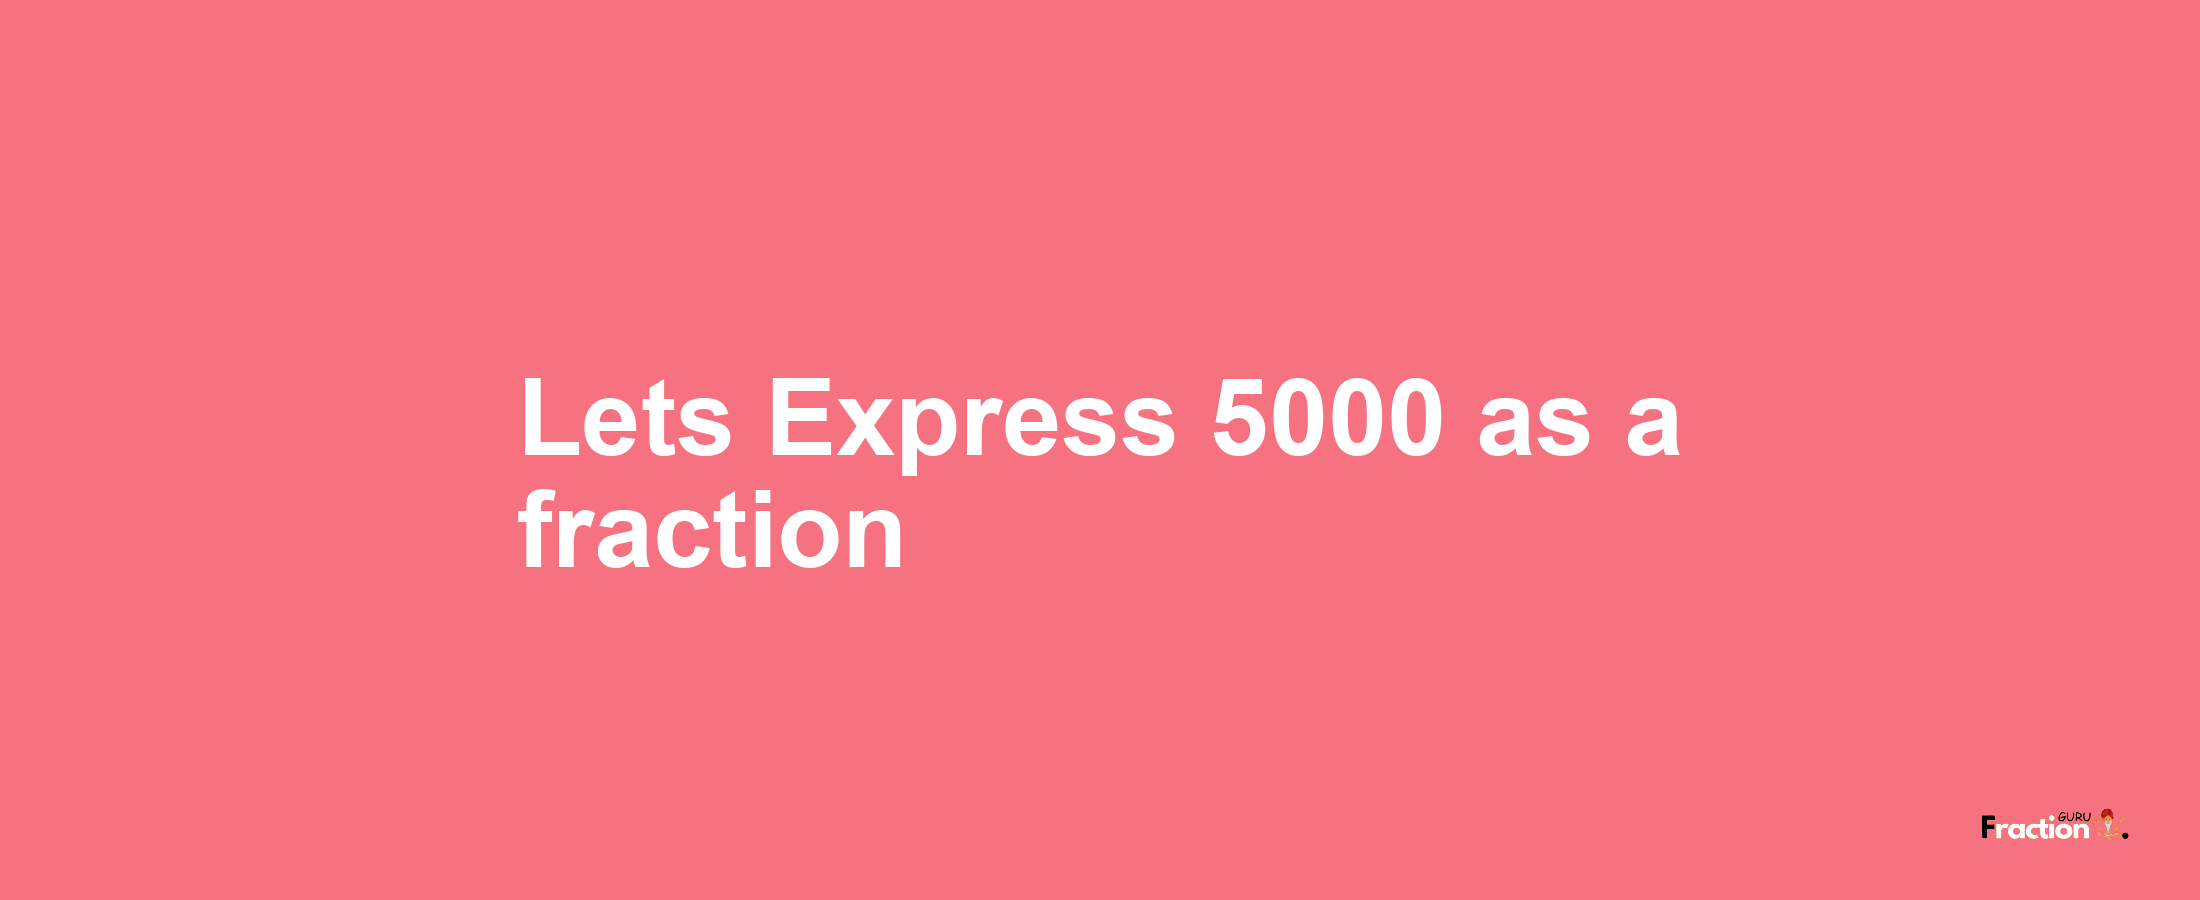 Lets Express 5000 as afraction